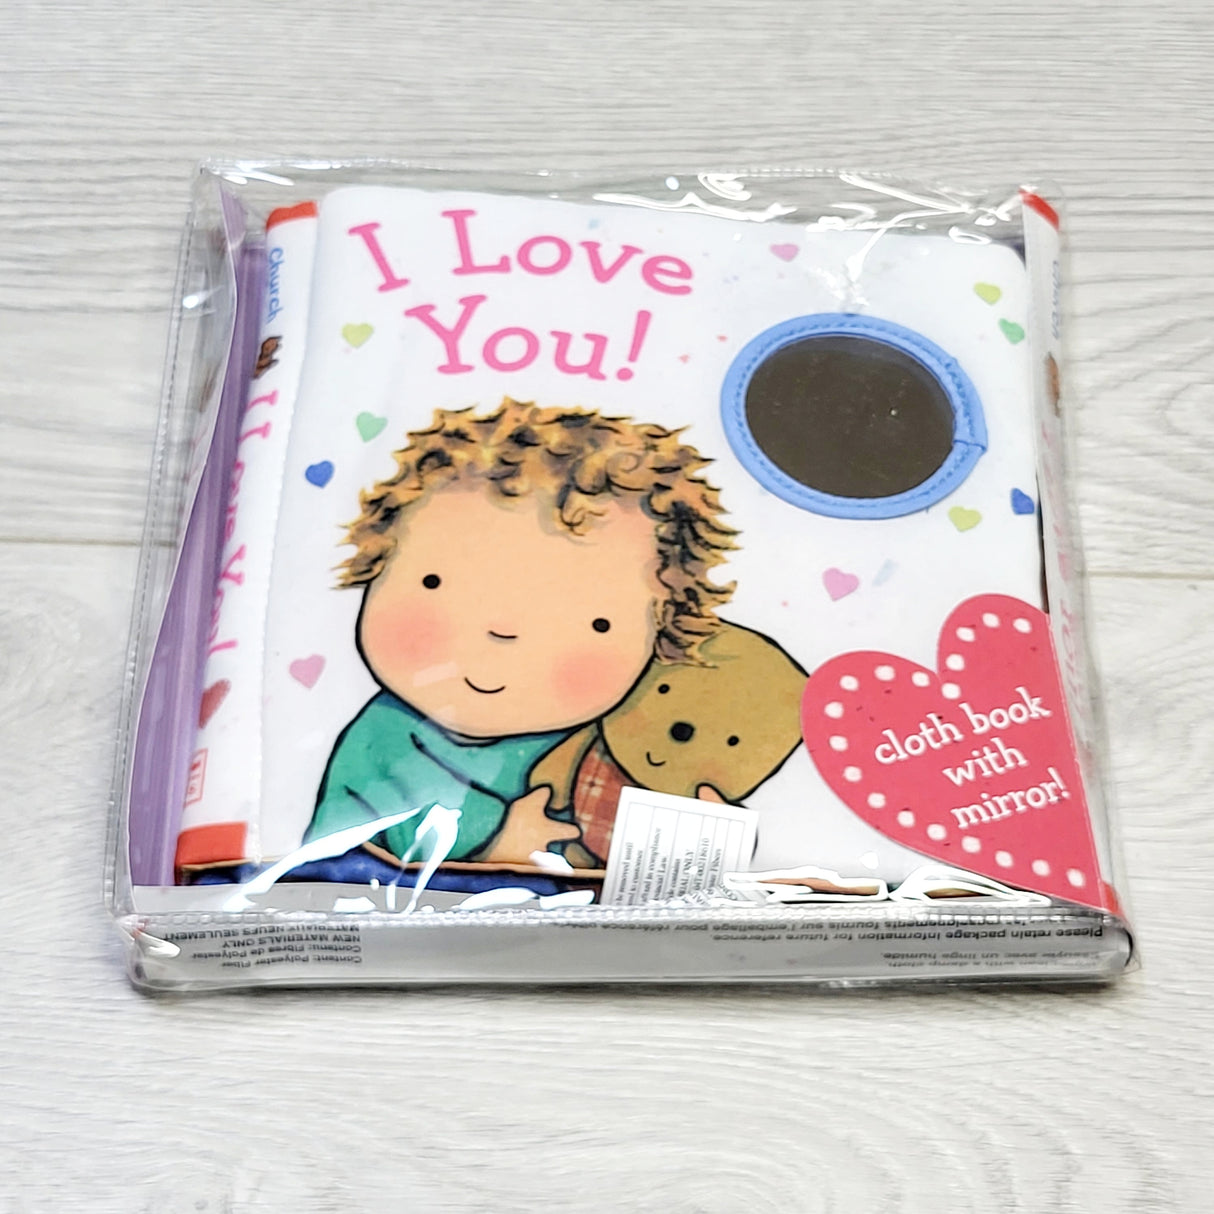 KSAL3 - NEW - I Love You cloth book with mirror